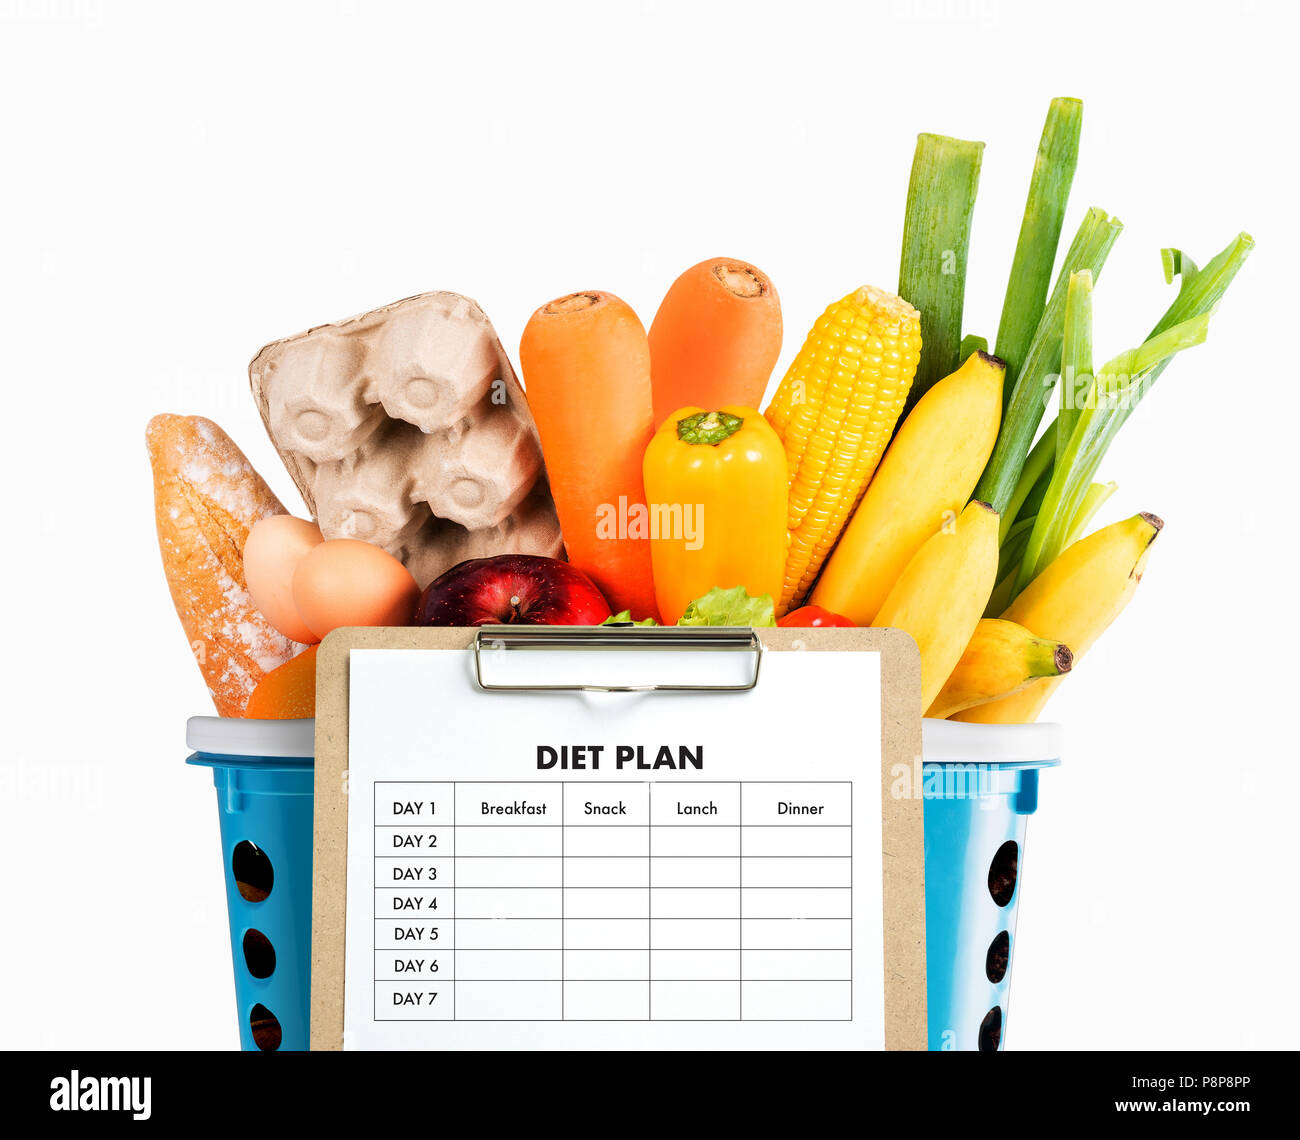 DIET PLAN healthy eating, dieting, slimming and weigh loss concept Stock Photo